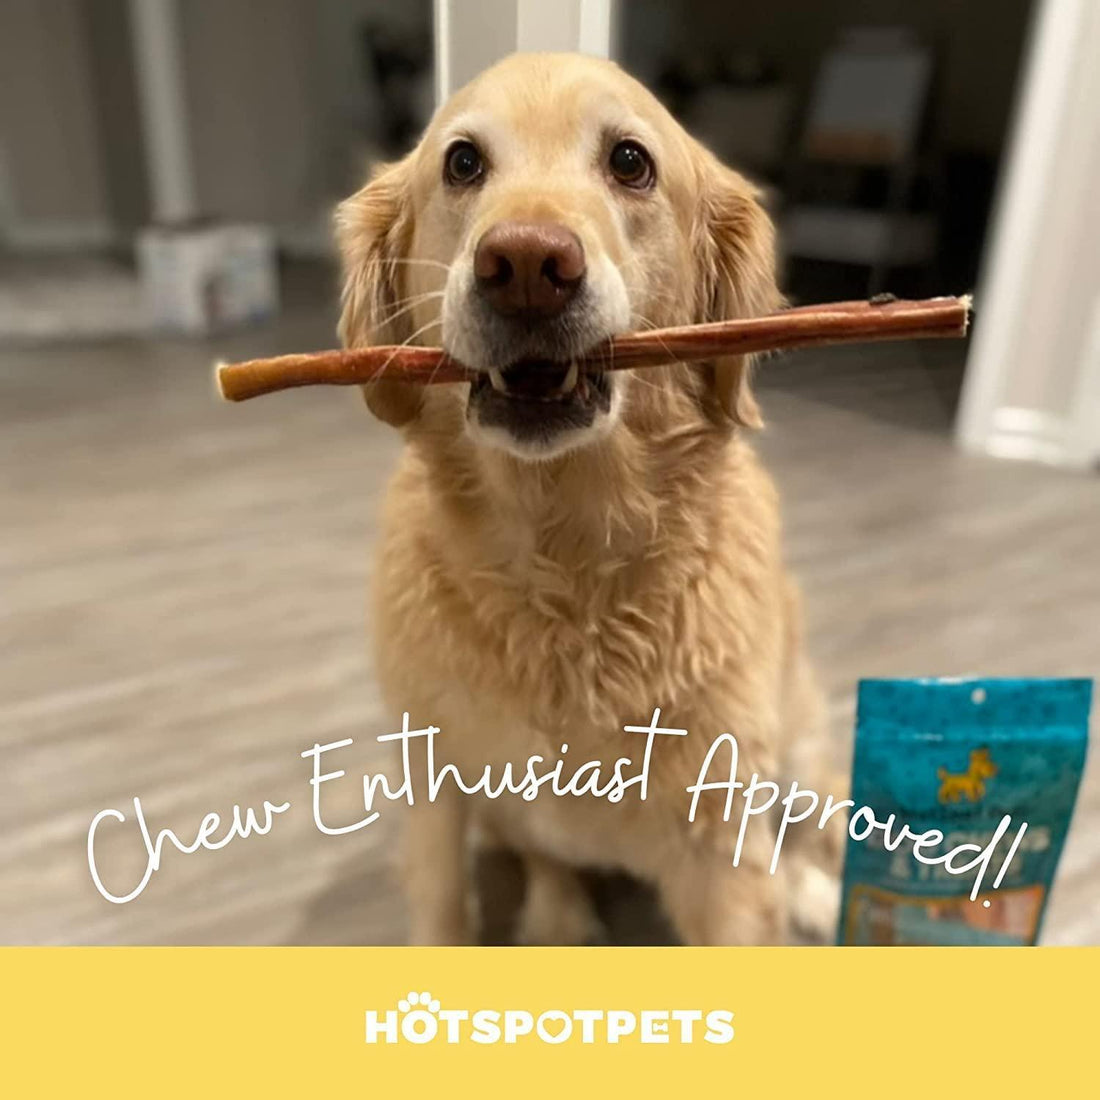 12" Jumbo Bully Sticks for Large & Extra Large Dogs | Bully Sticks at HotSpot Pets